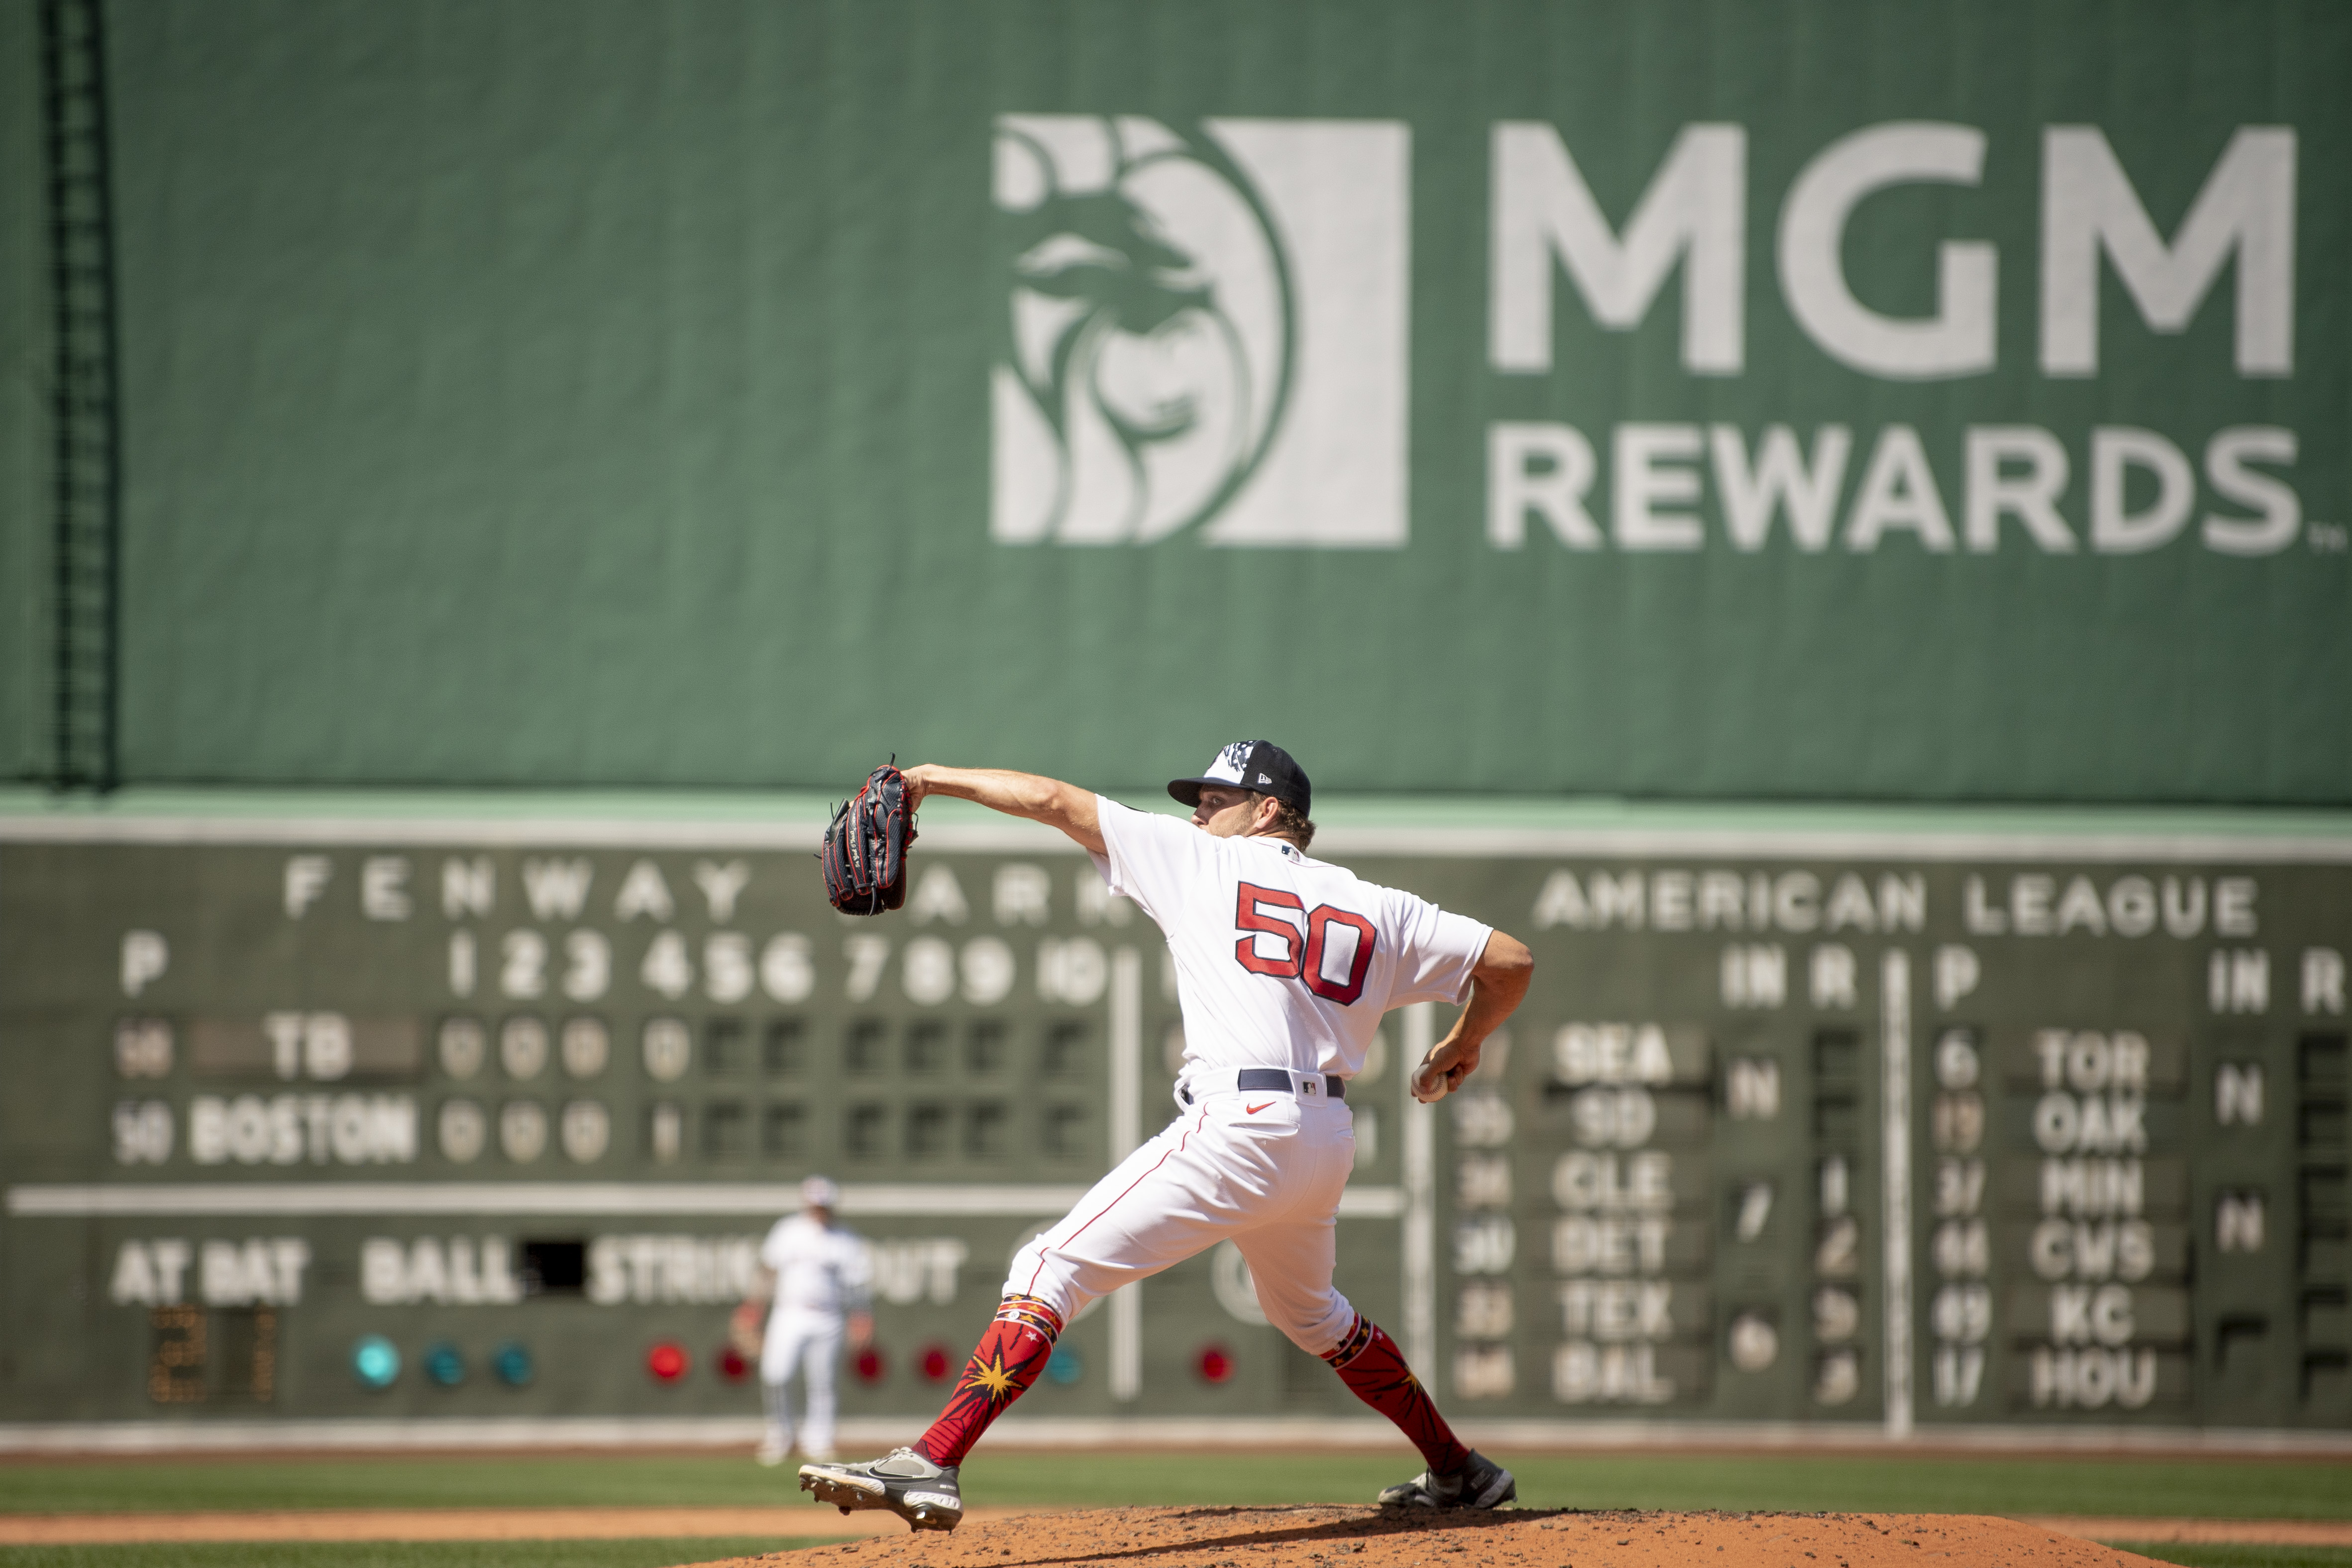 Boston Red Sox Season Preview: Can Kutter Crawford develop an effective  offspeed pitch? - Over the Monster